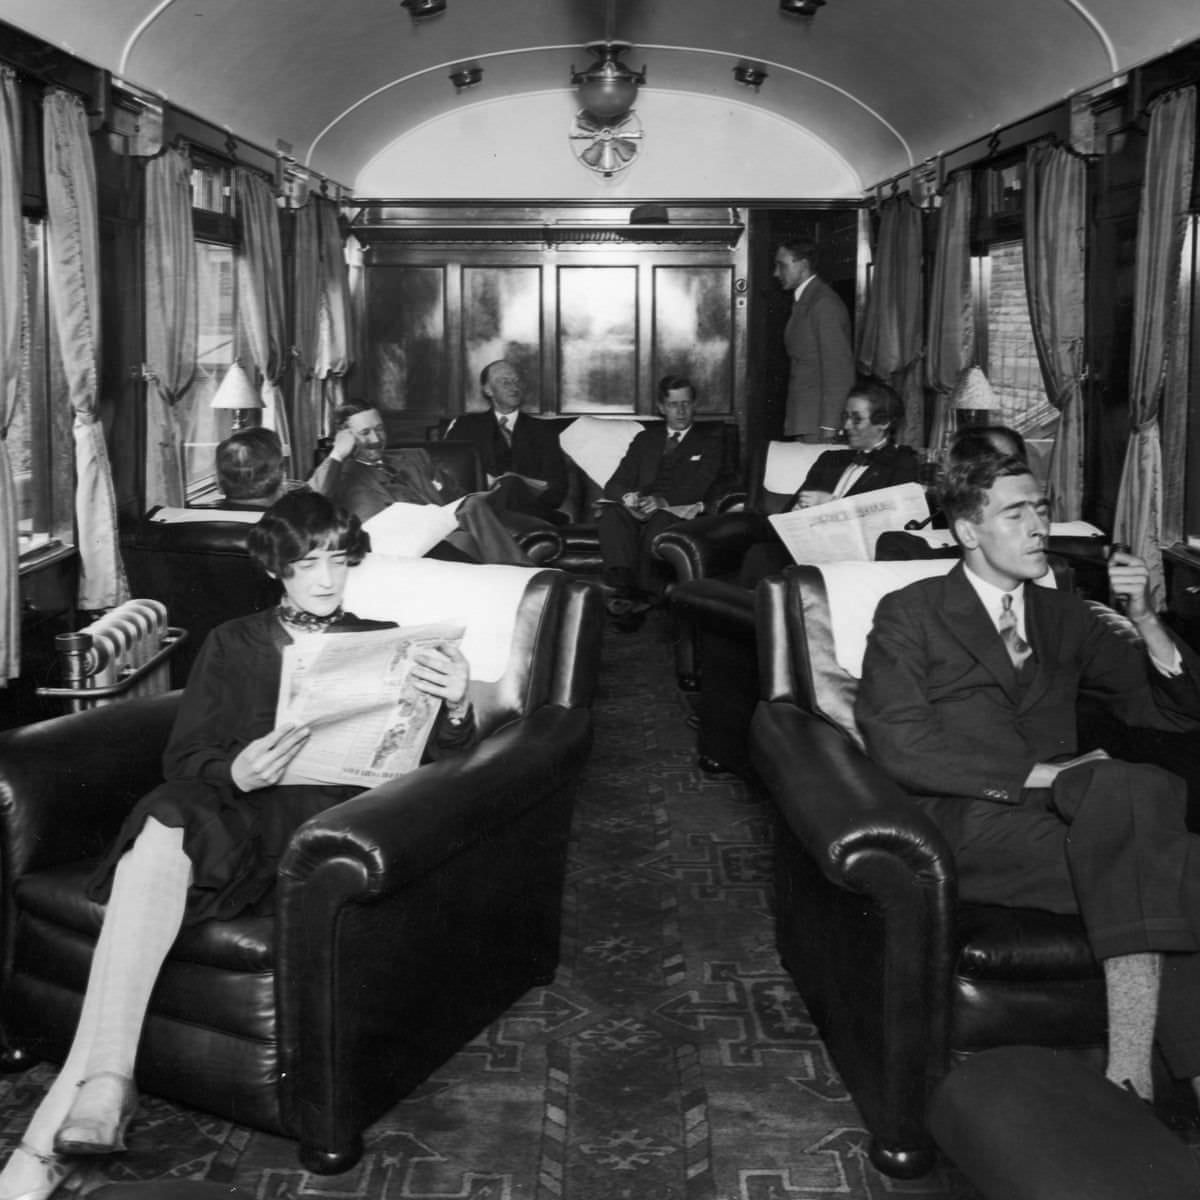 The luxurious first class lounge on board a London Midland and Scottish Royal Scot train, 1928.